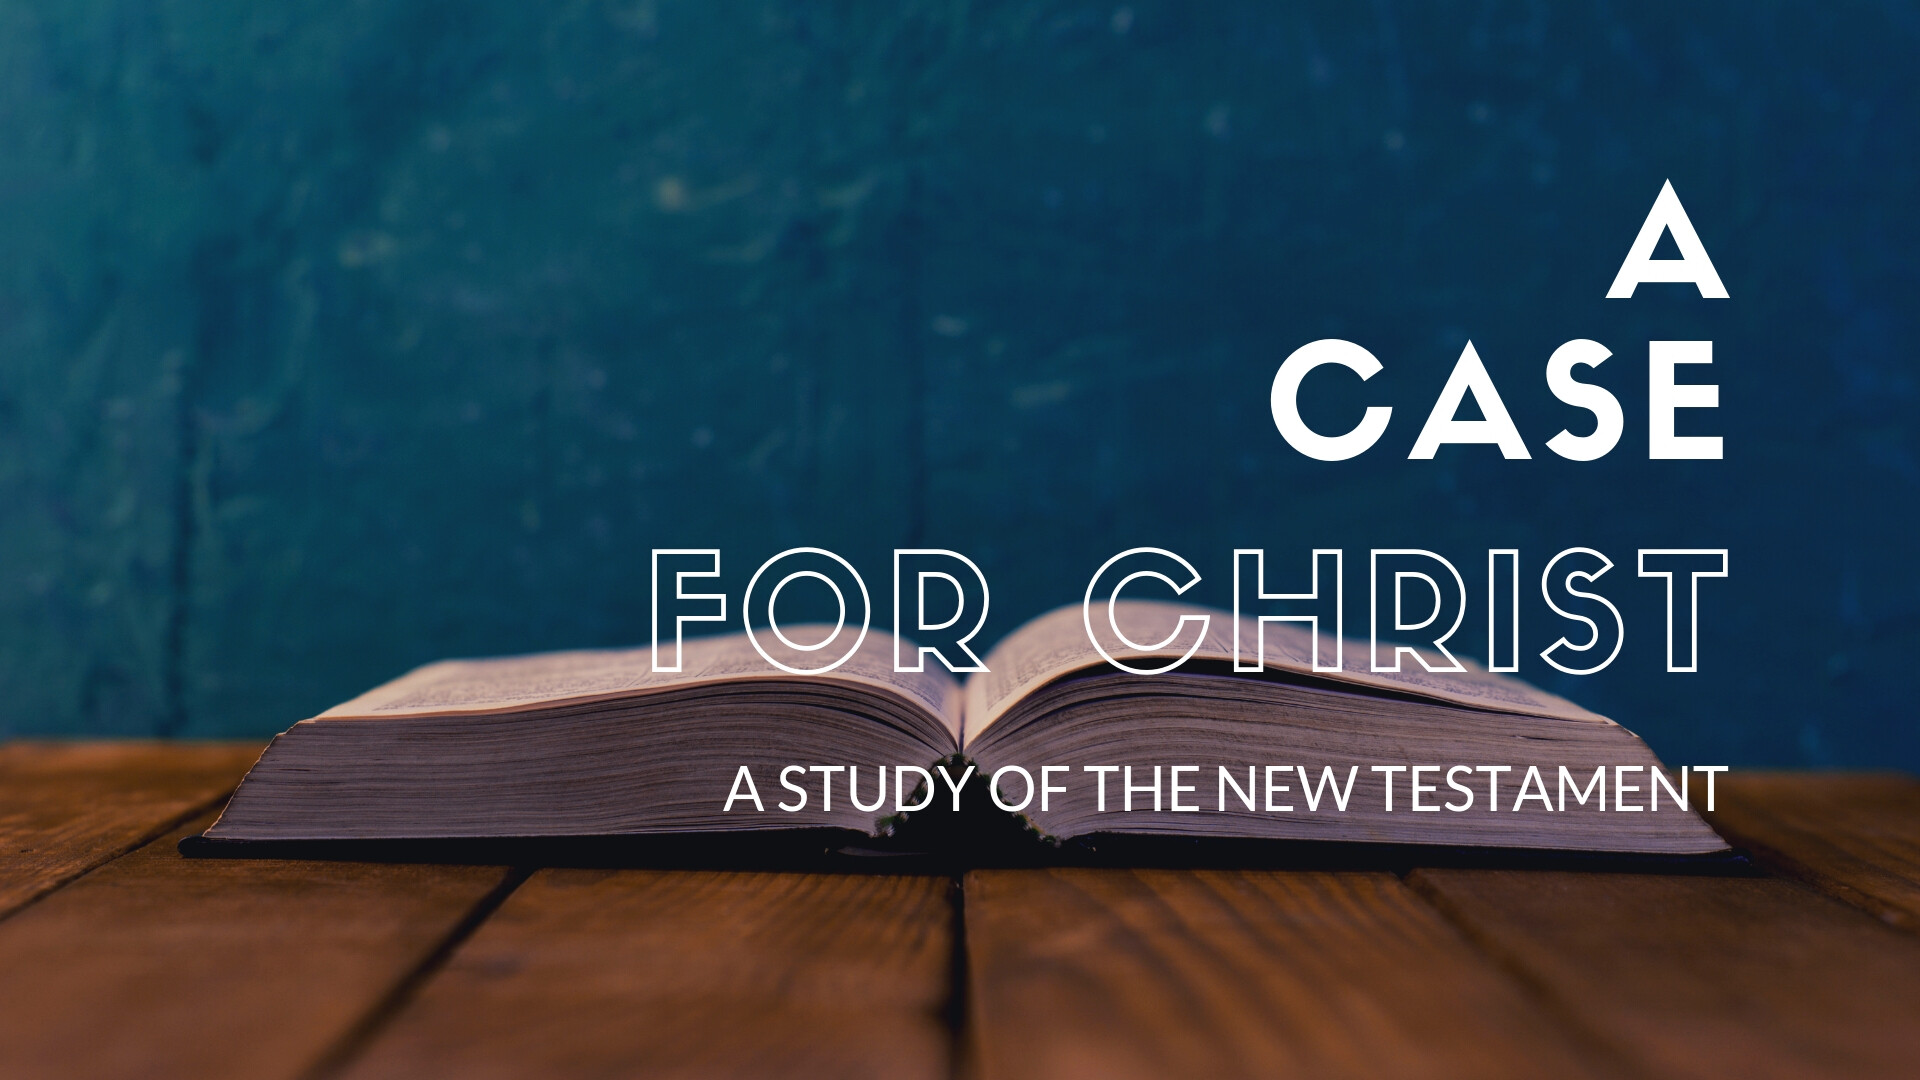 A Case for Christ: A Case for the New Testament